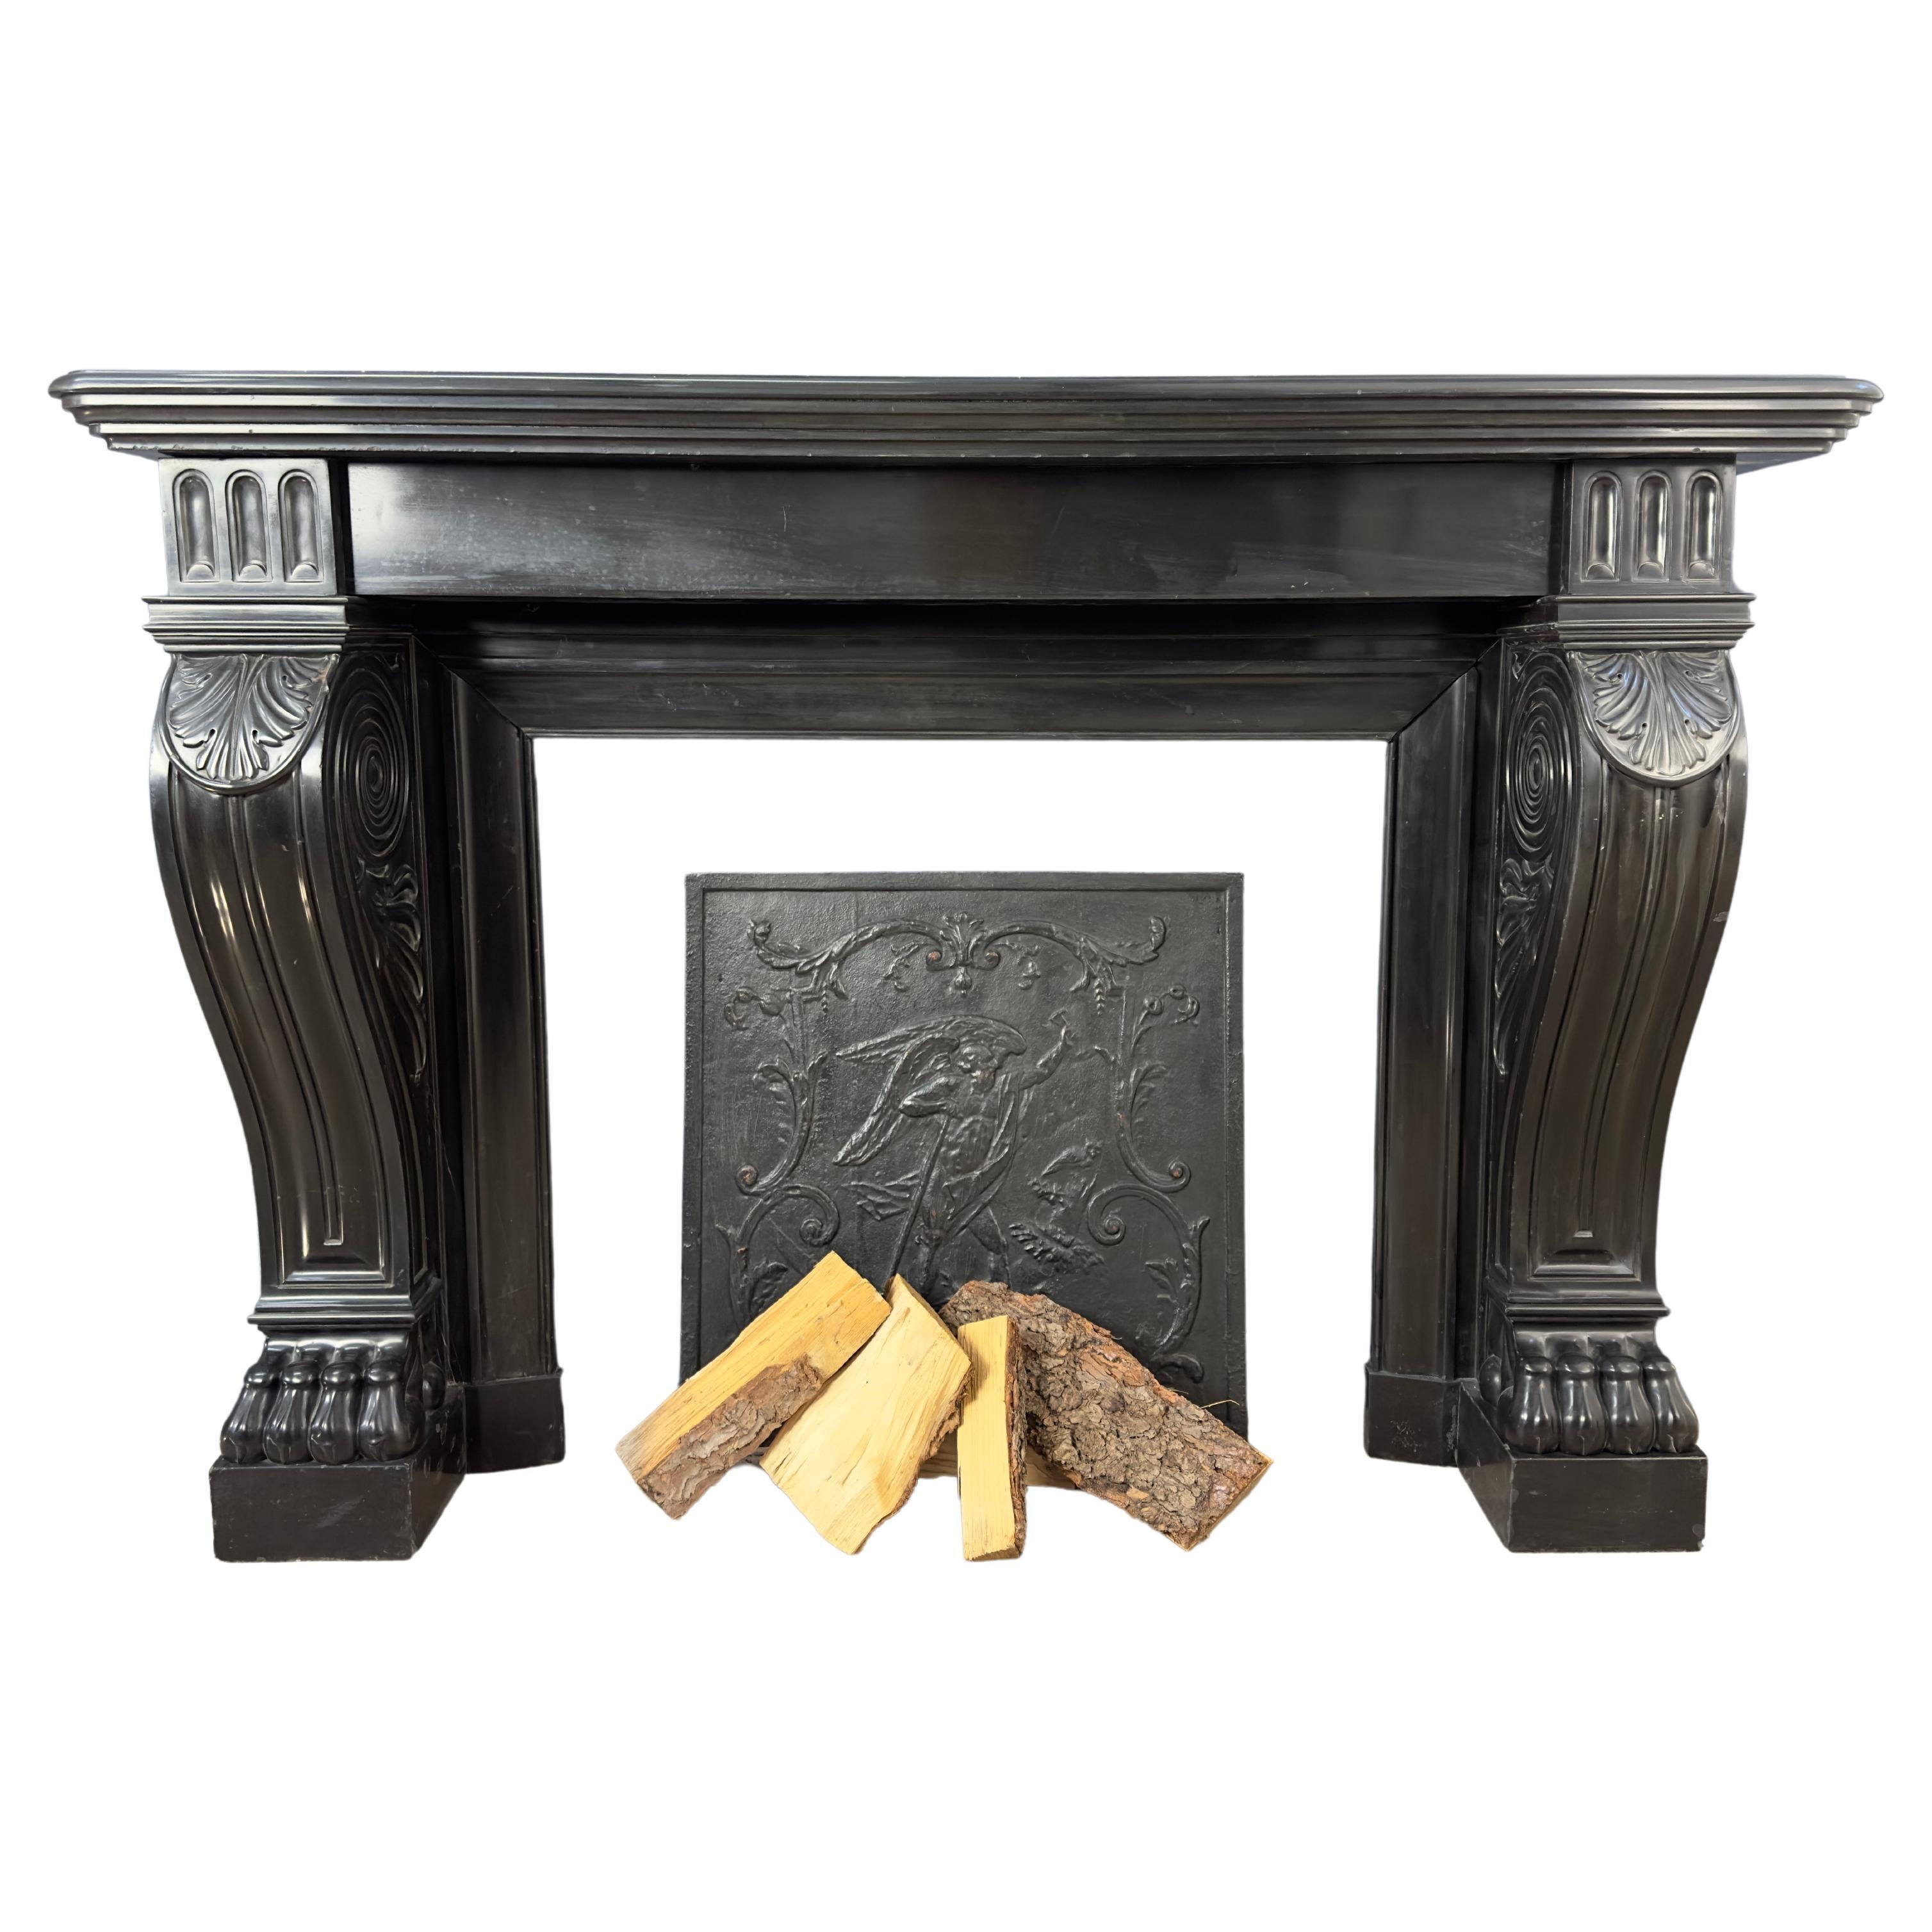 Gorgeous Richly Decorated Front Fireplace Surround in Noir De Mazy Black Marble